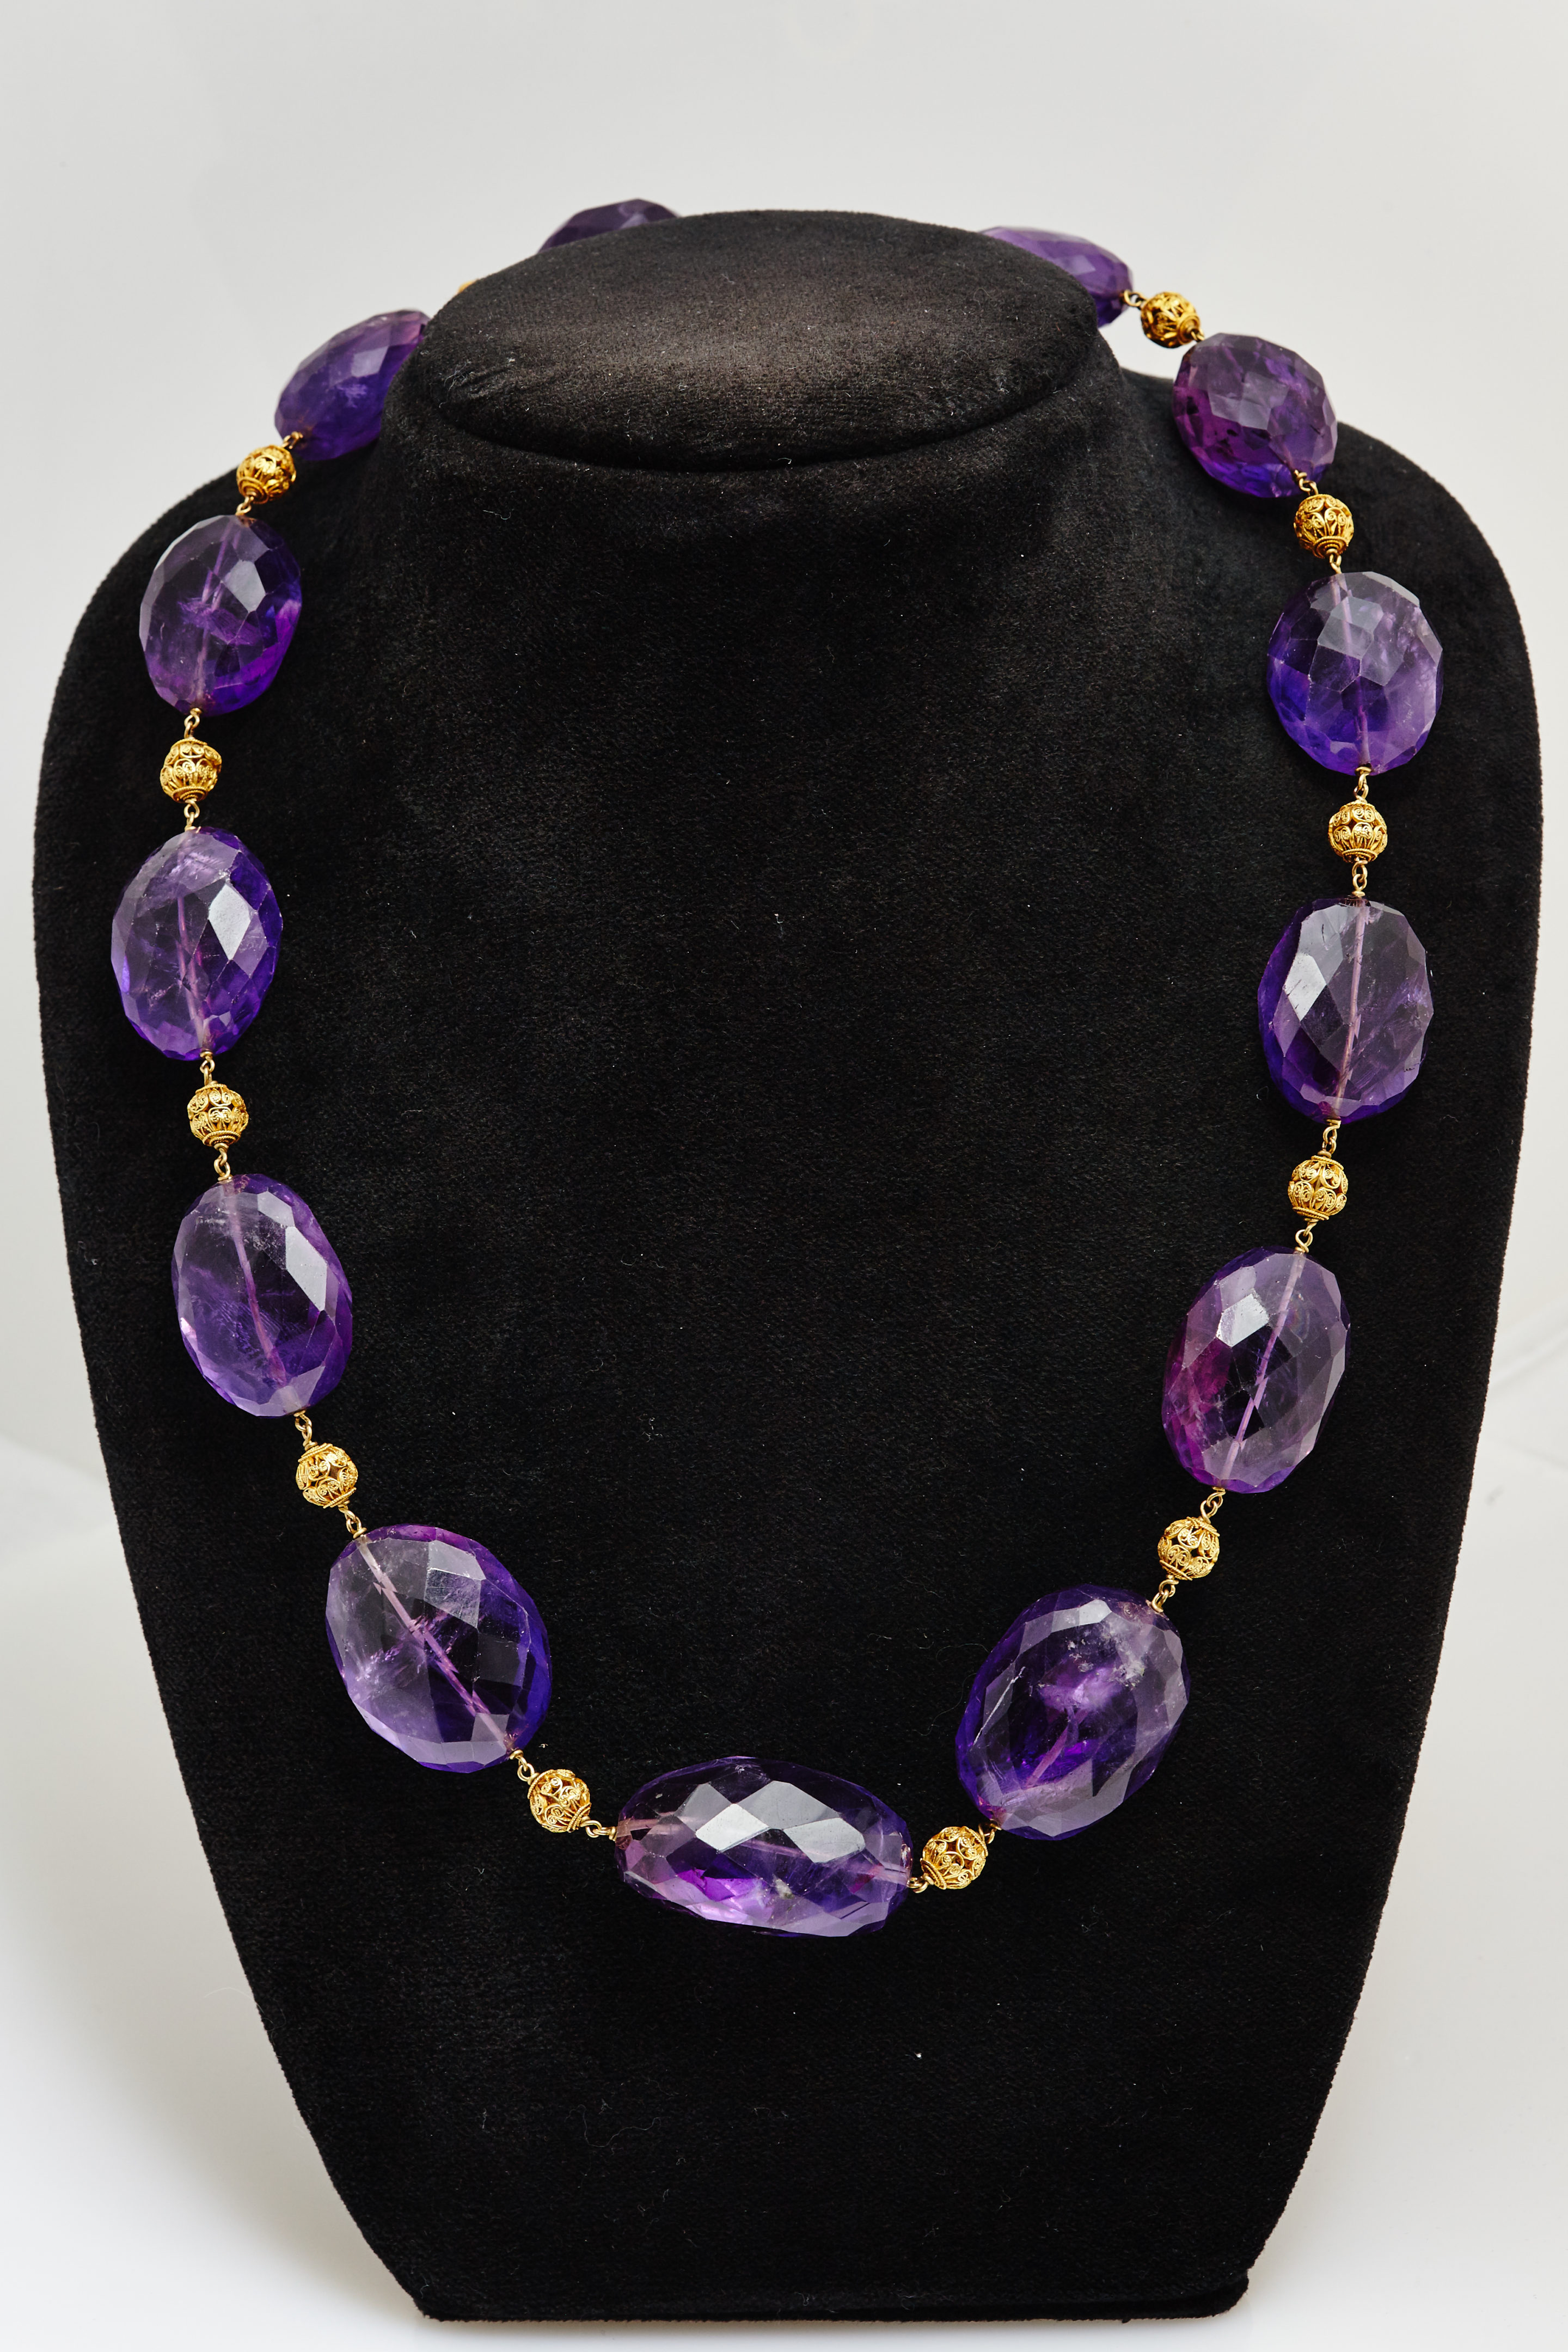 Buy Purple Amethyst Stone Necklace by Do Taara Online at Aza Fashions.